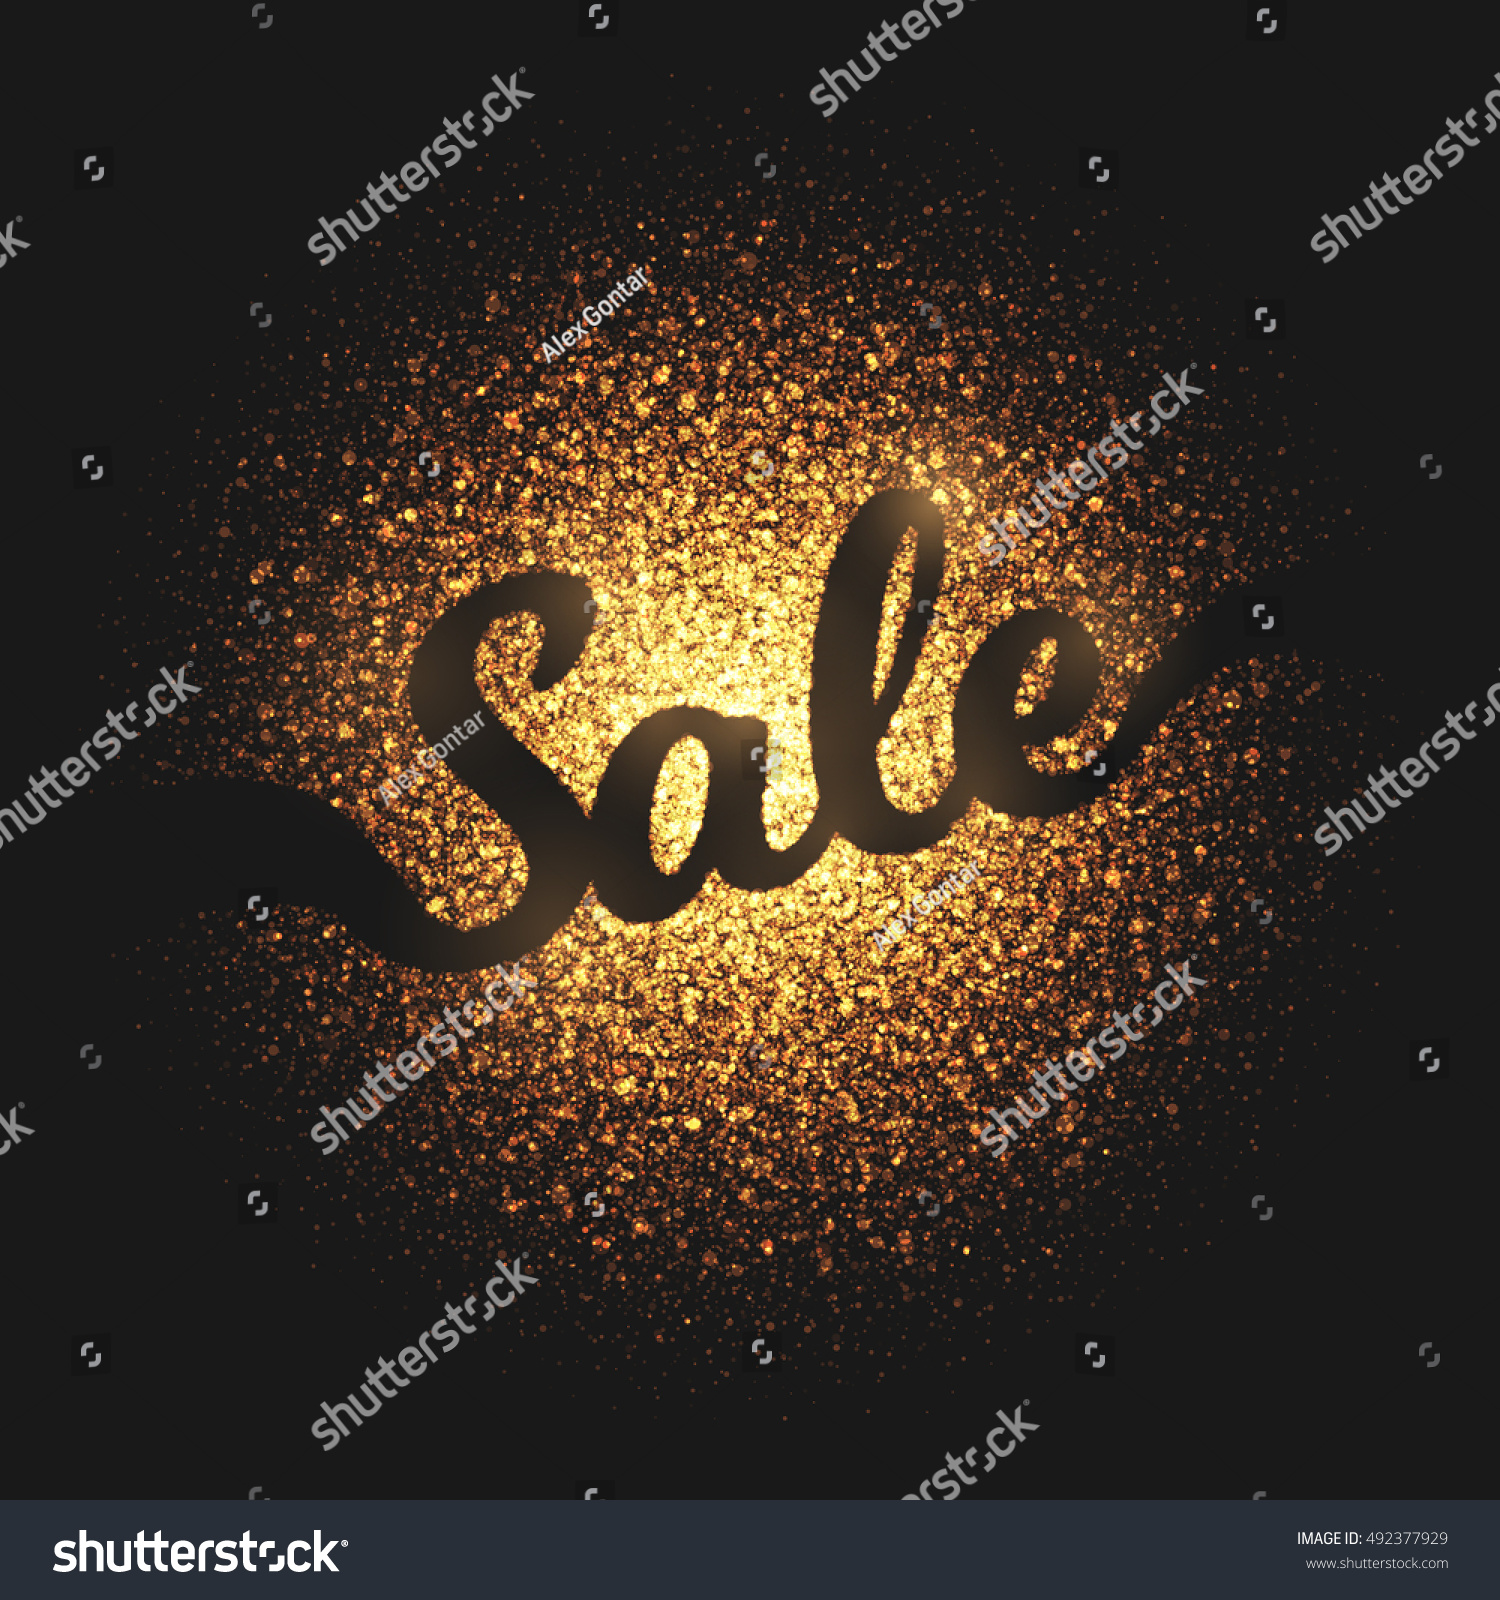 Sale bright golden shimmer glowing round particles vector background. Scatter shine tinsel light explosion effect. Burning sparks wallpaper. Lettering and calligraphy artwork illustration #492377929